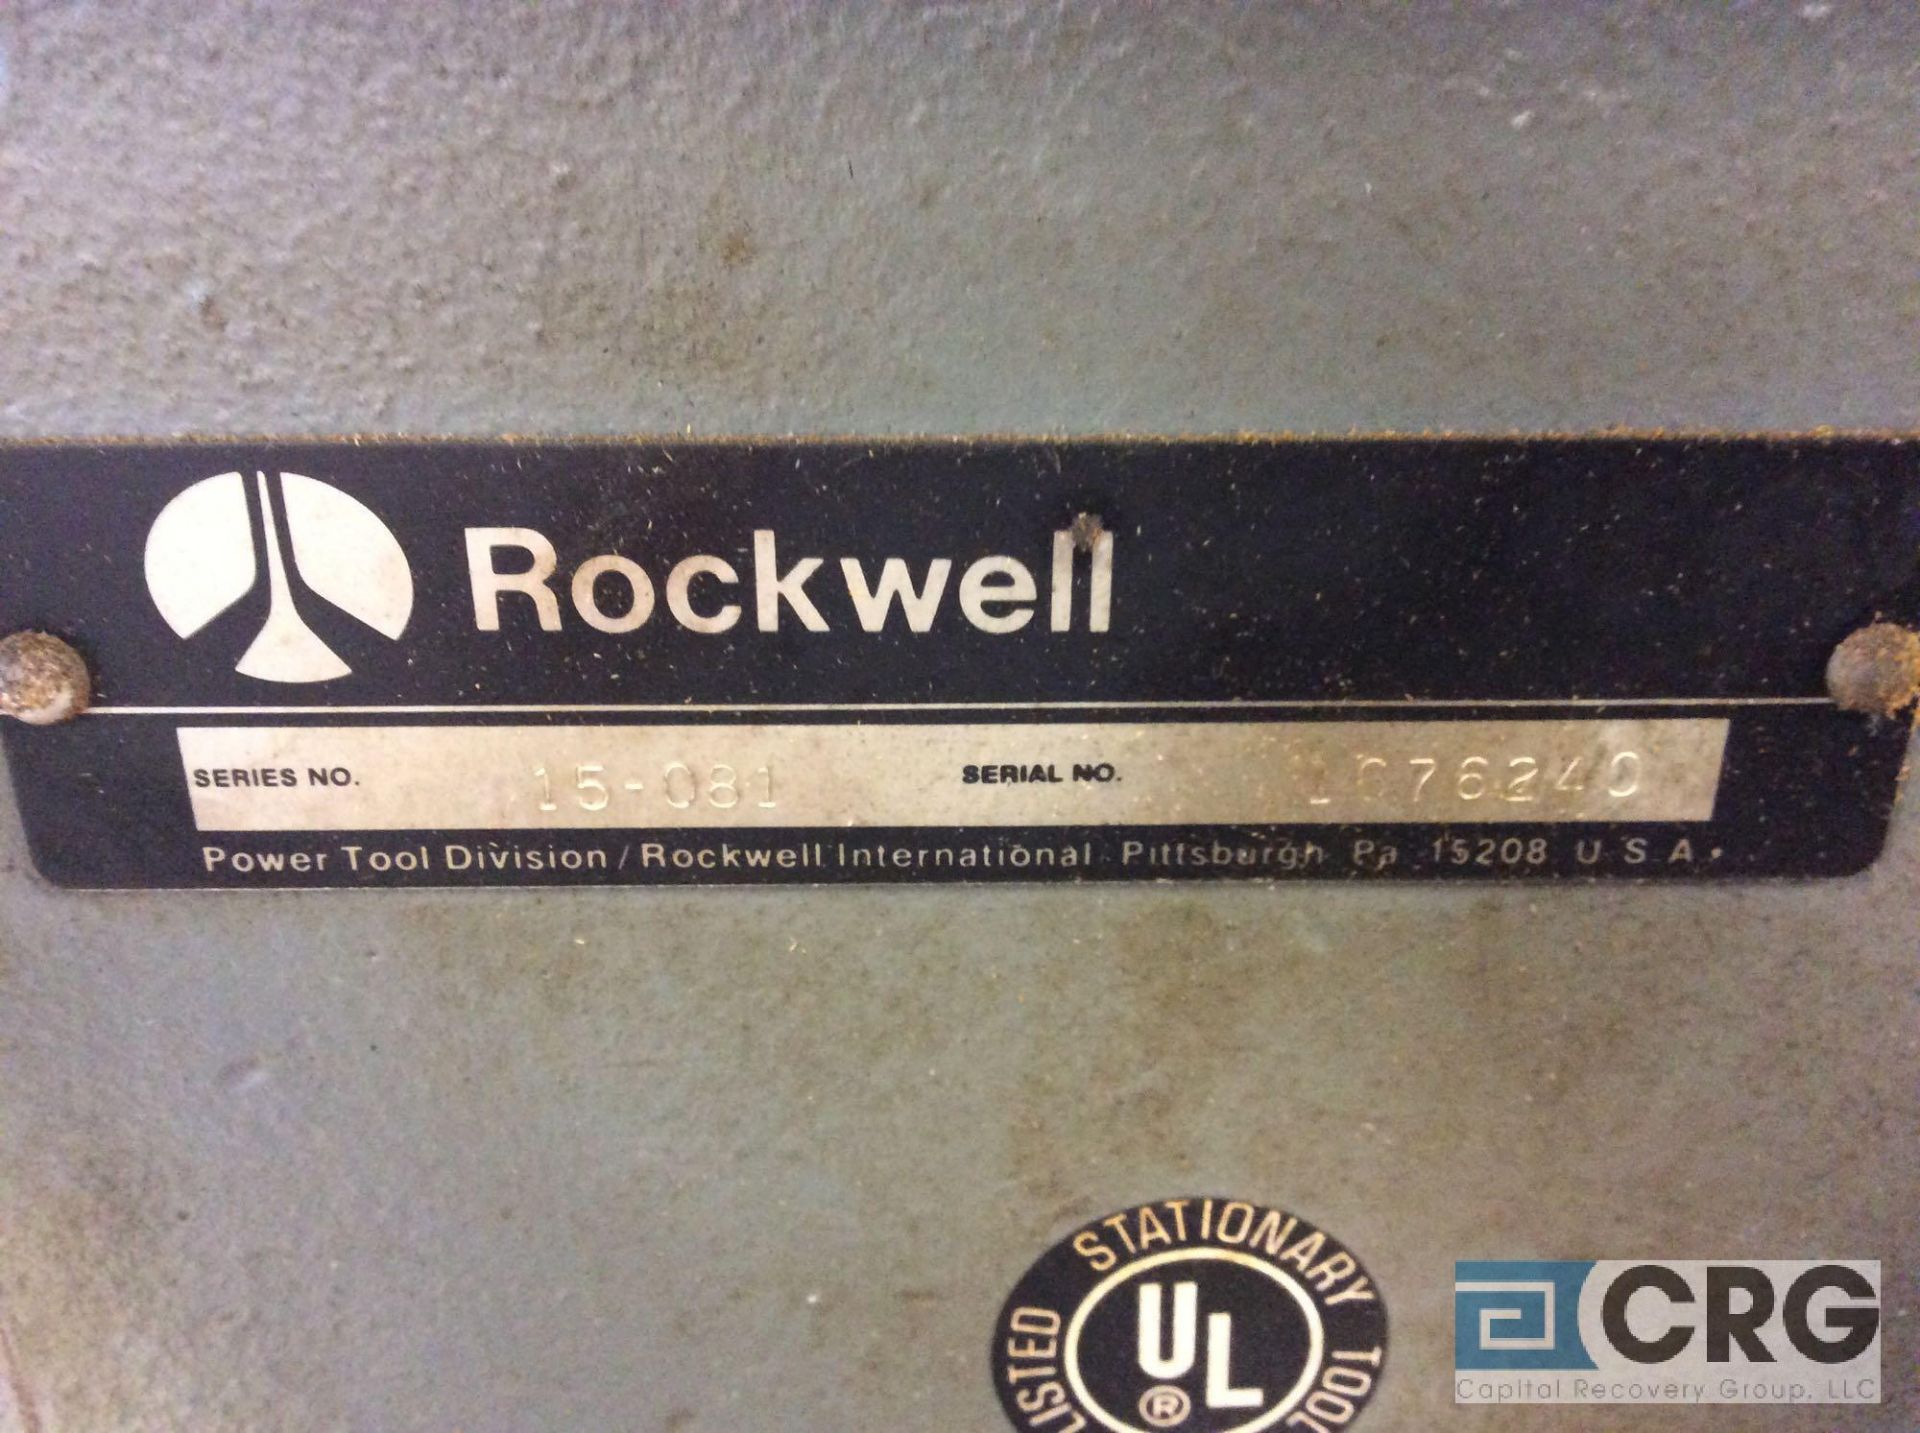 Rockwell 15” floor type drill press, mn 15-081, 1 phase - Image 3 of 3